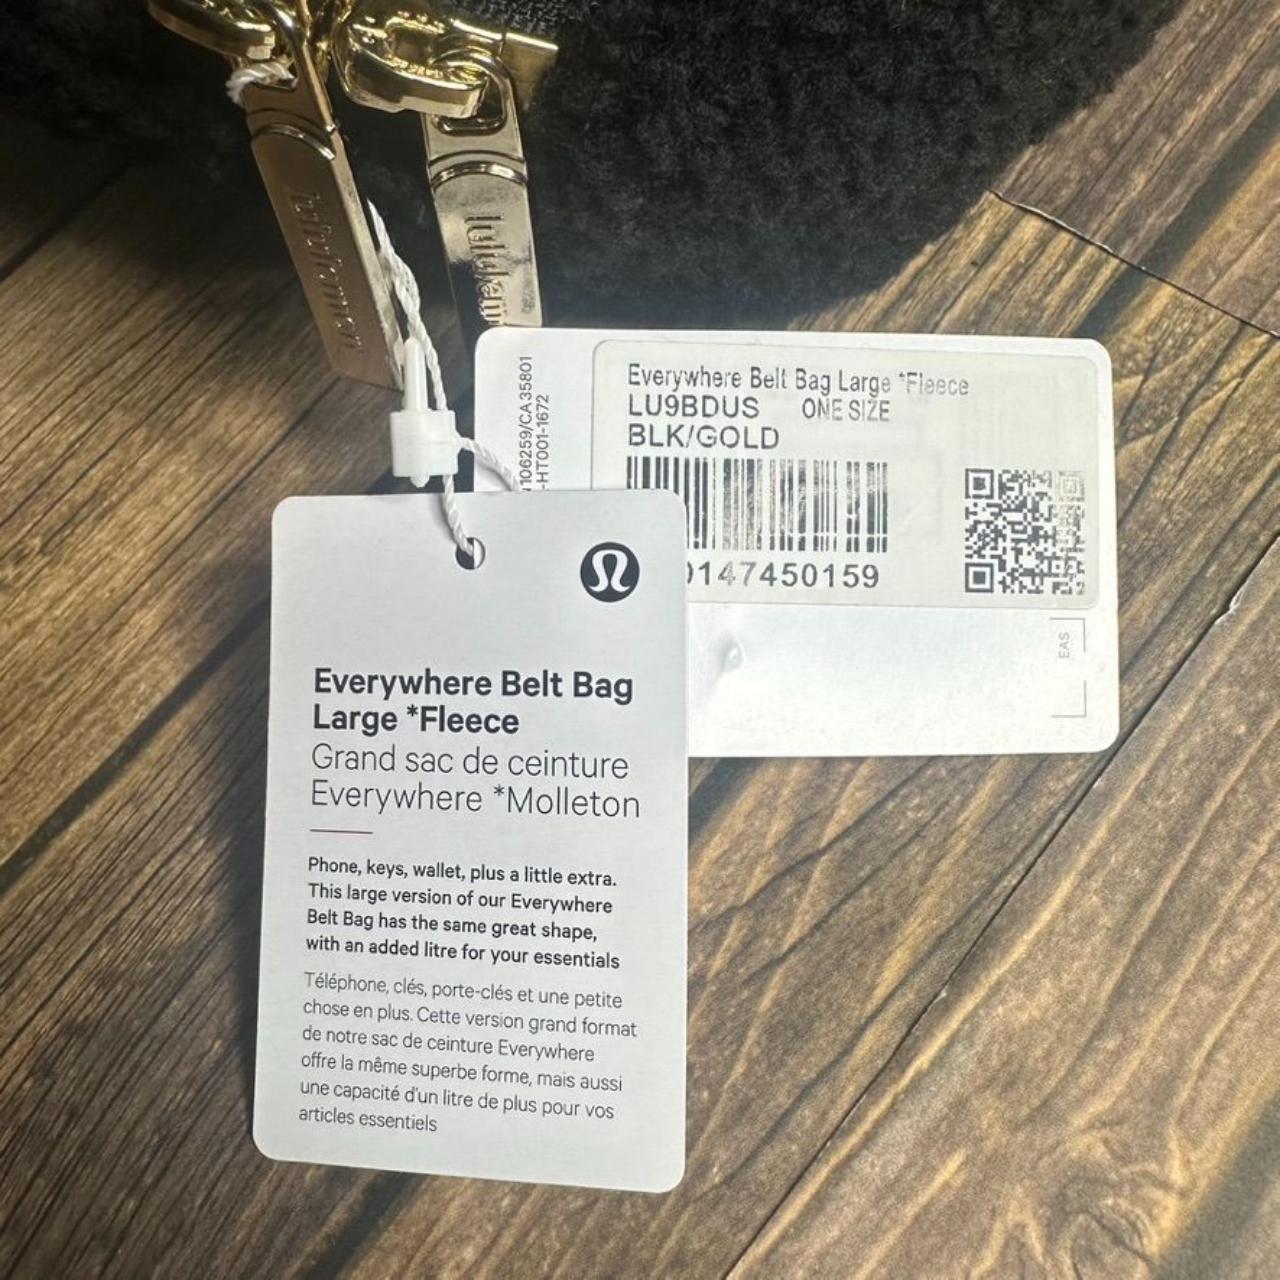 NWT Lululemon Everywhere Belt Bag in Black Large Size SOLD OUT